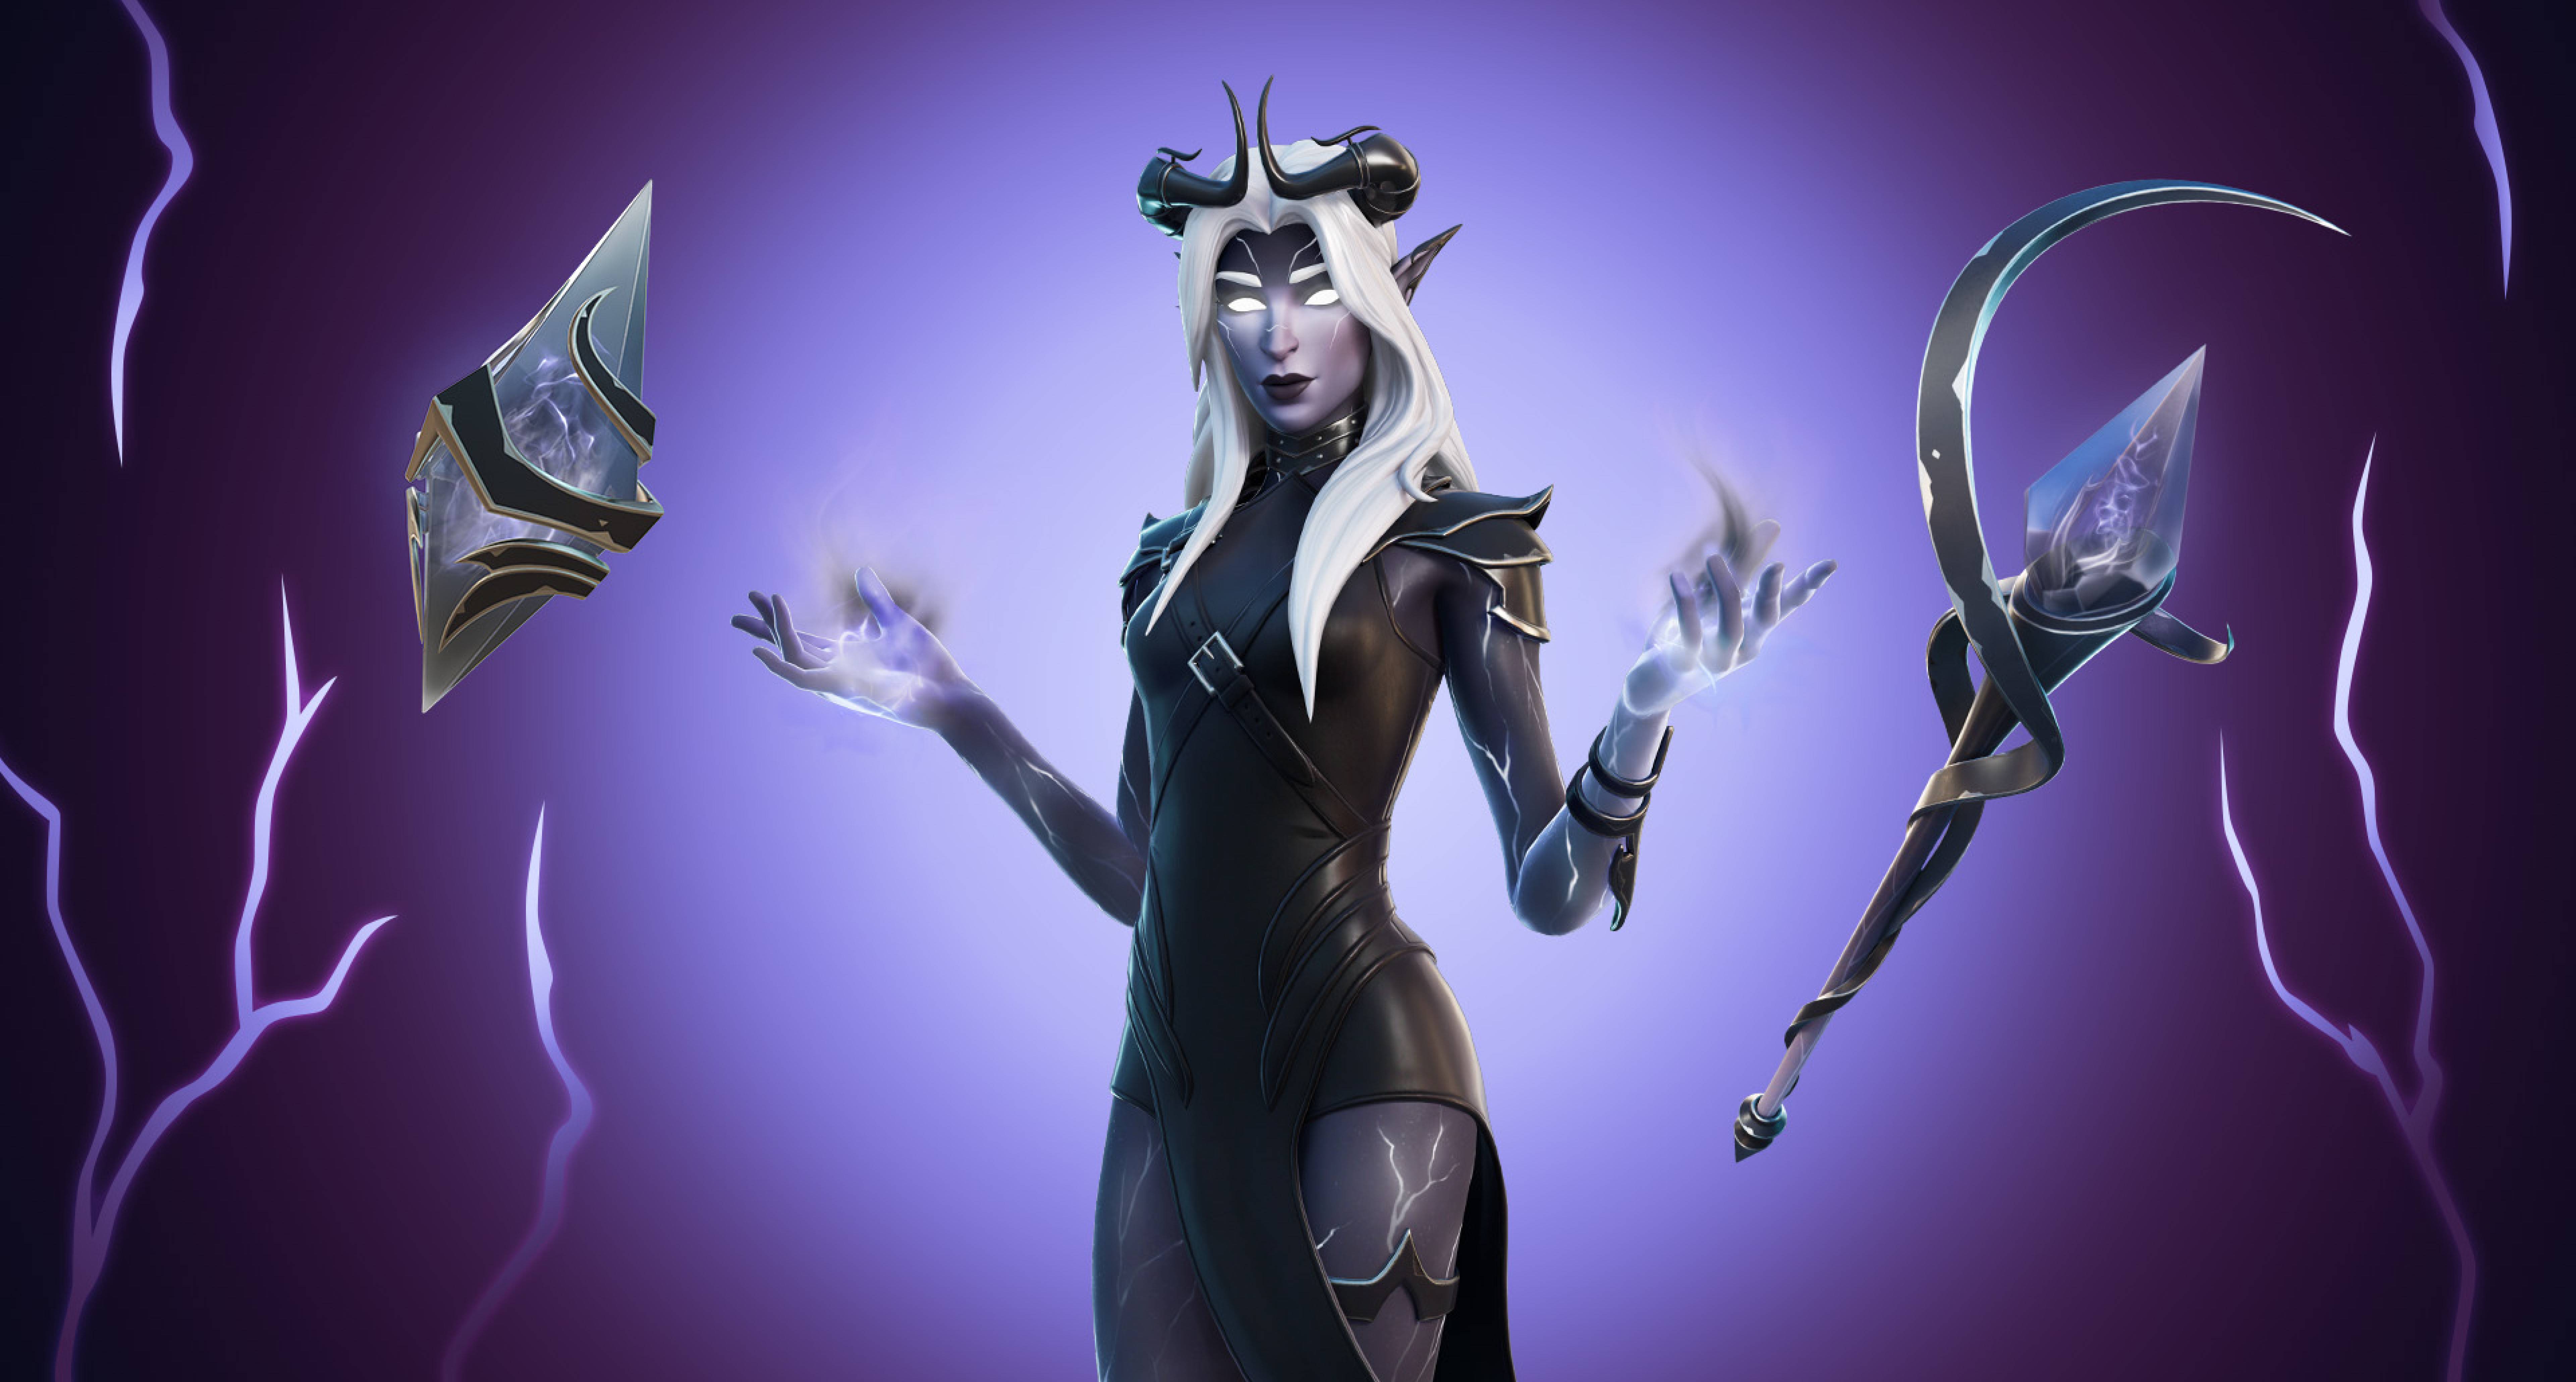 Etheria Fortnite 7680x4120 Resolution Wallpaper, HD Games 4K Wallpaper, Image, Photo and Background